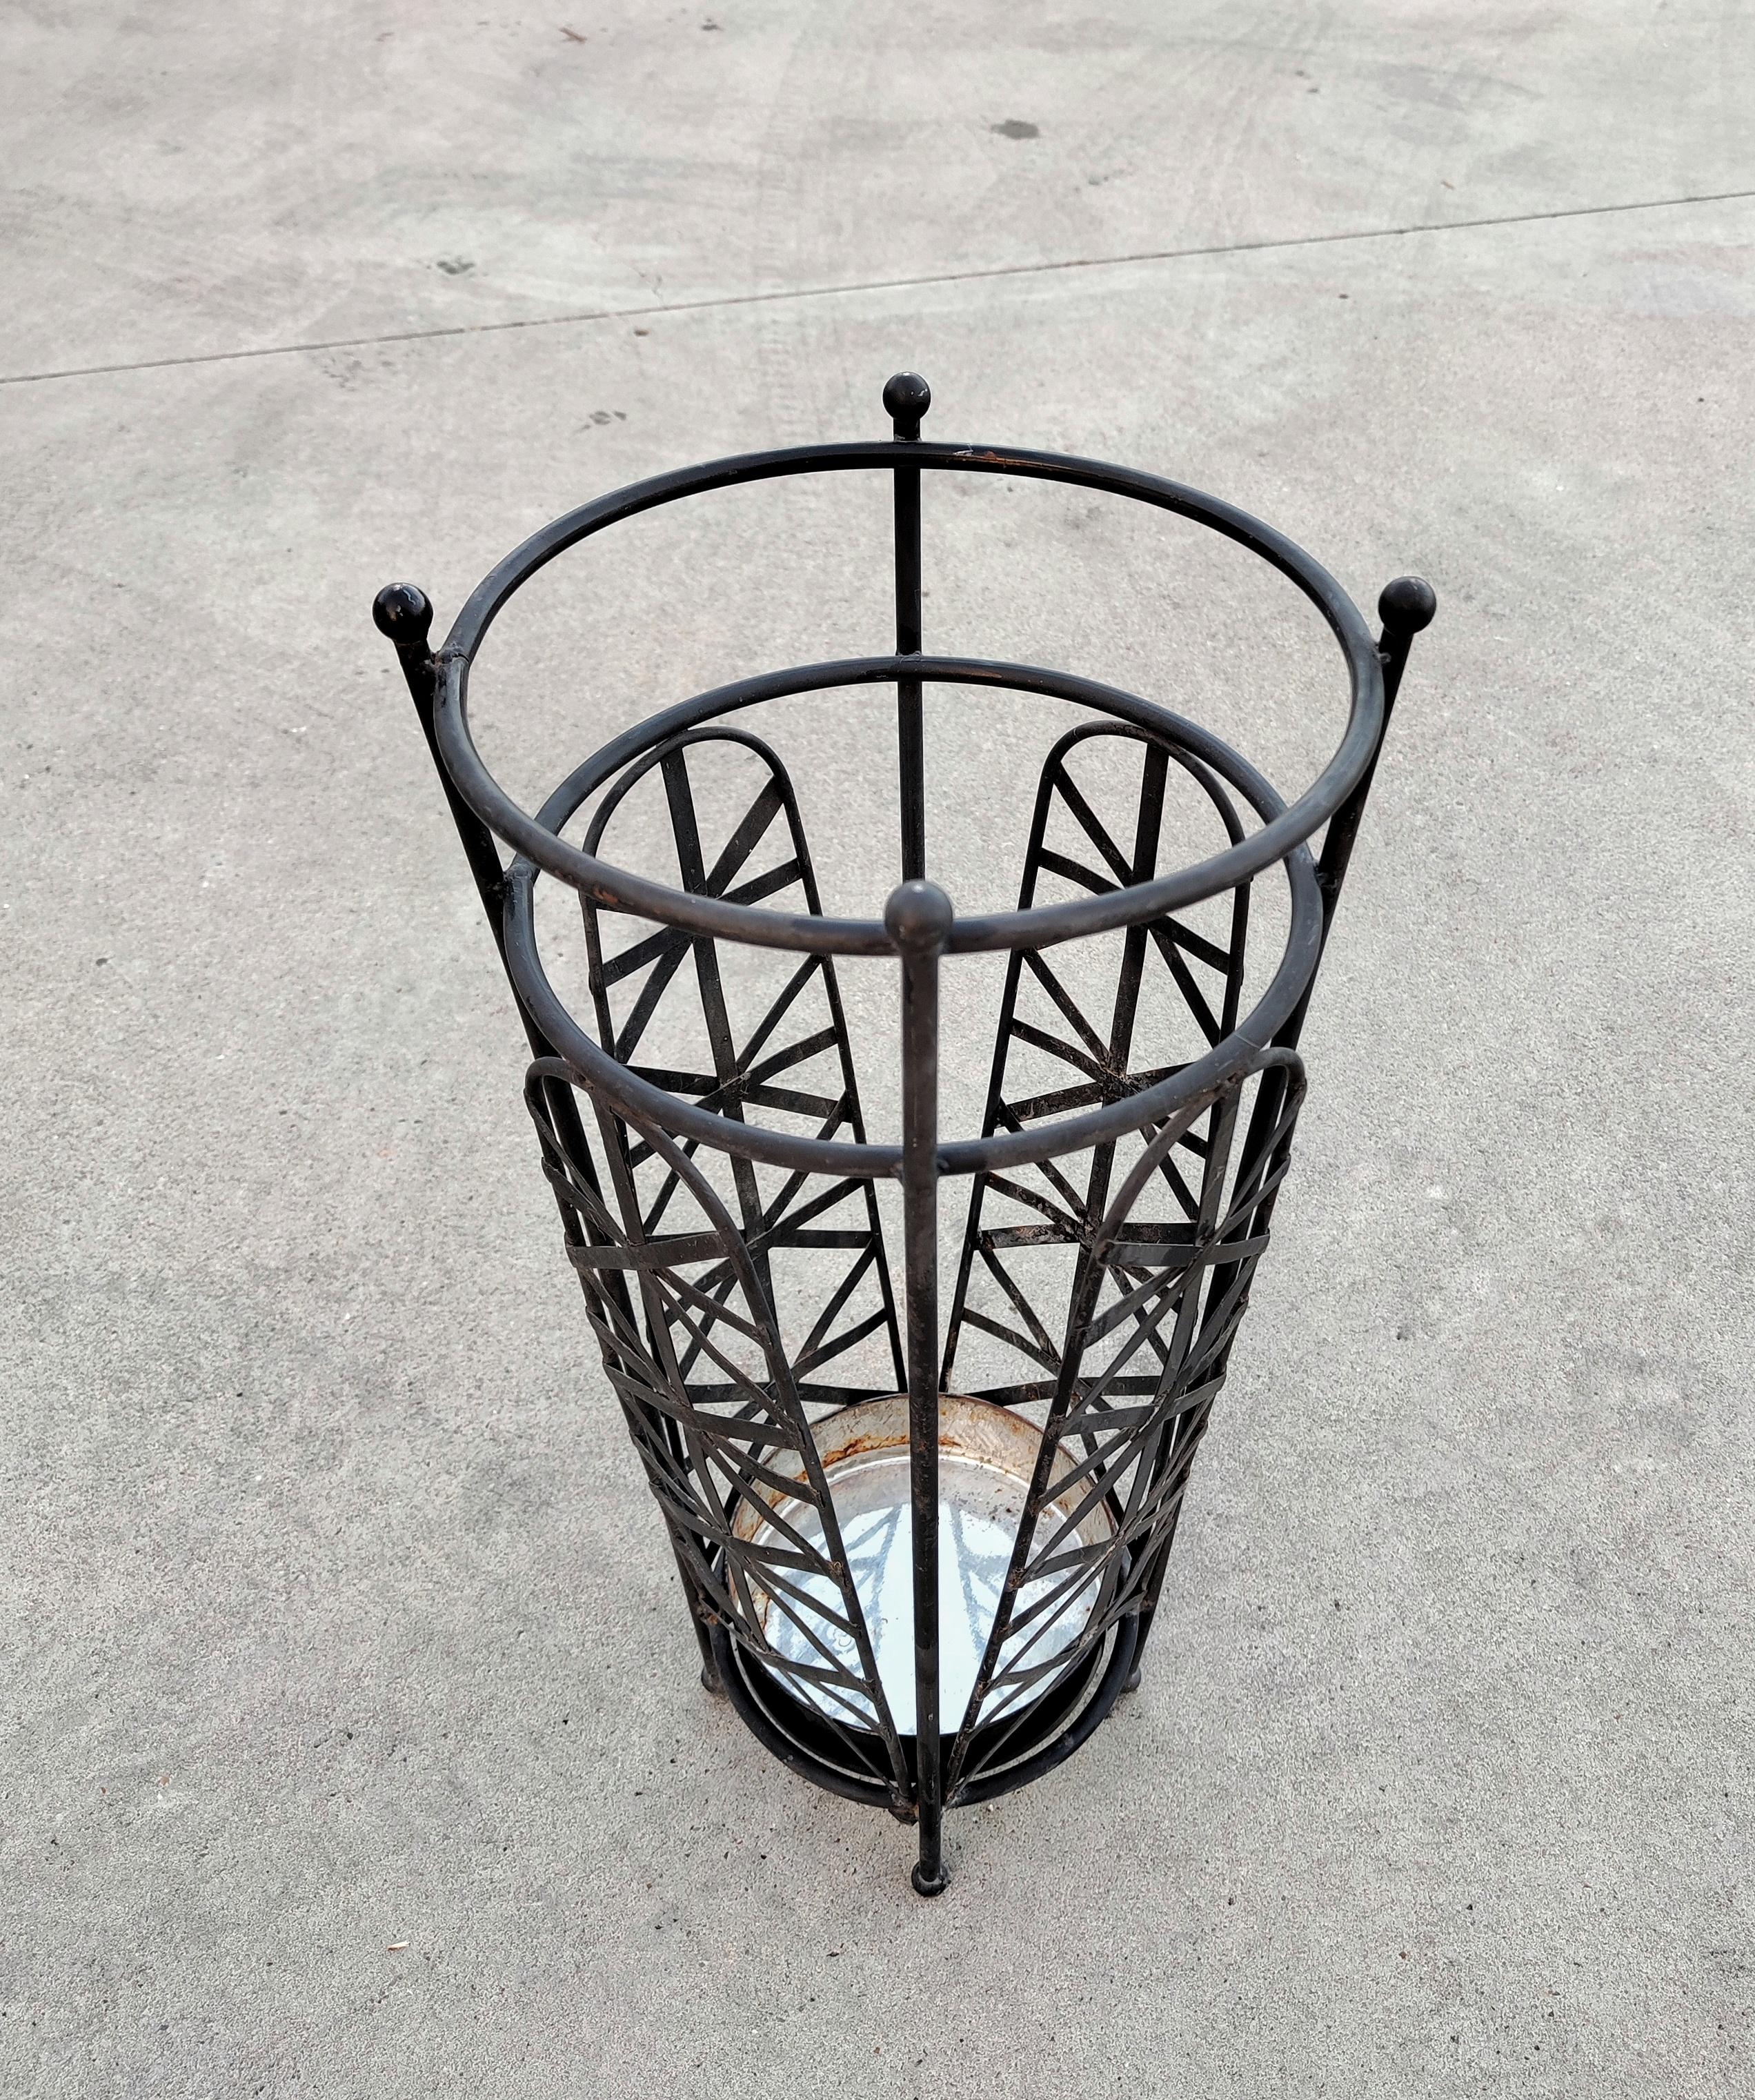 In this listing you will find a late Art Deco umbrella stand done in black iron. It features beautiful decorative woven pattern all around that gives it very elegant looks. The umbrella stand was made in Italy in 1950s.

Very good vintage condition